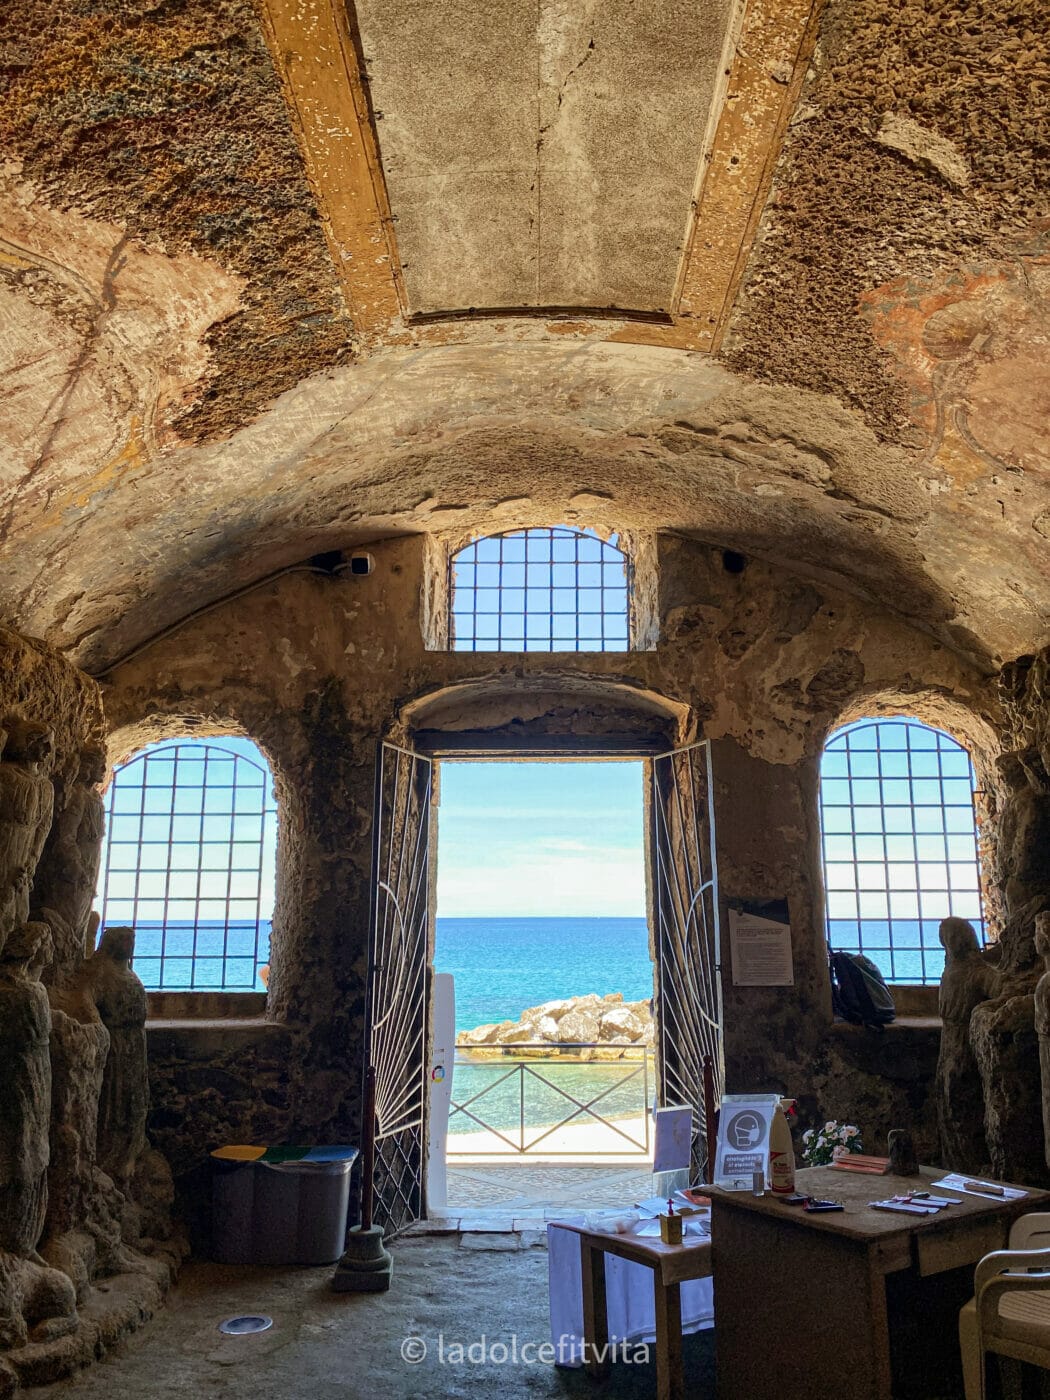 views of a turquoise sea from the interior of Piedigrotta Church in Pizzo Calabria